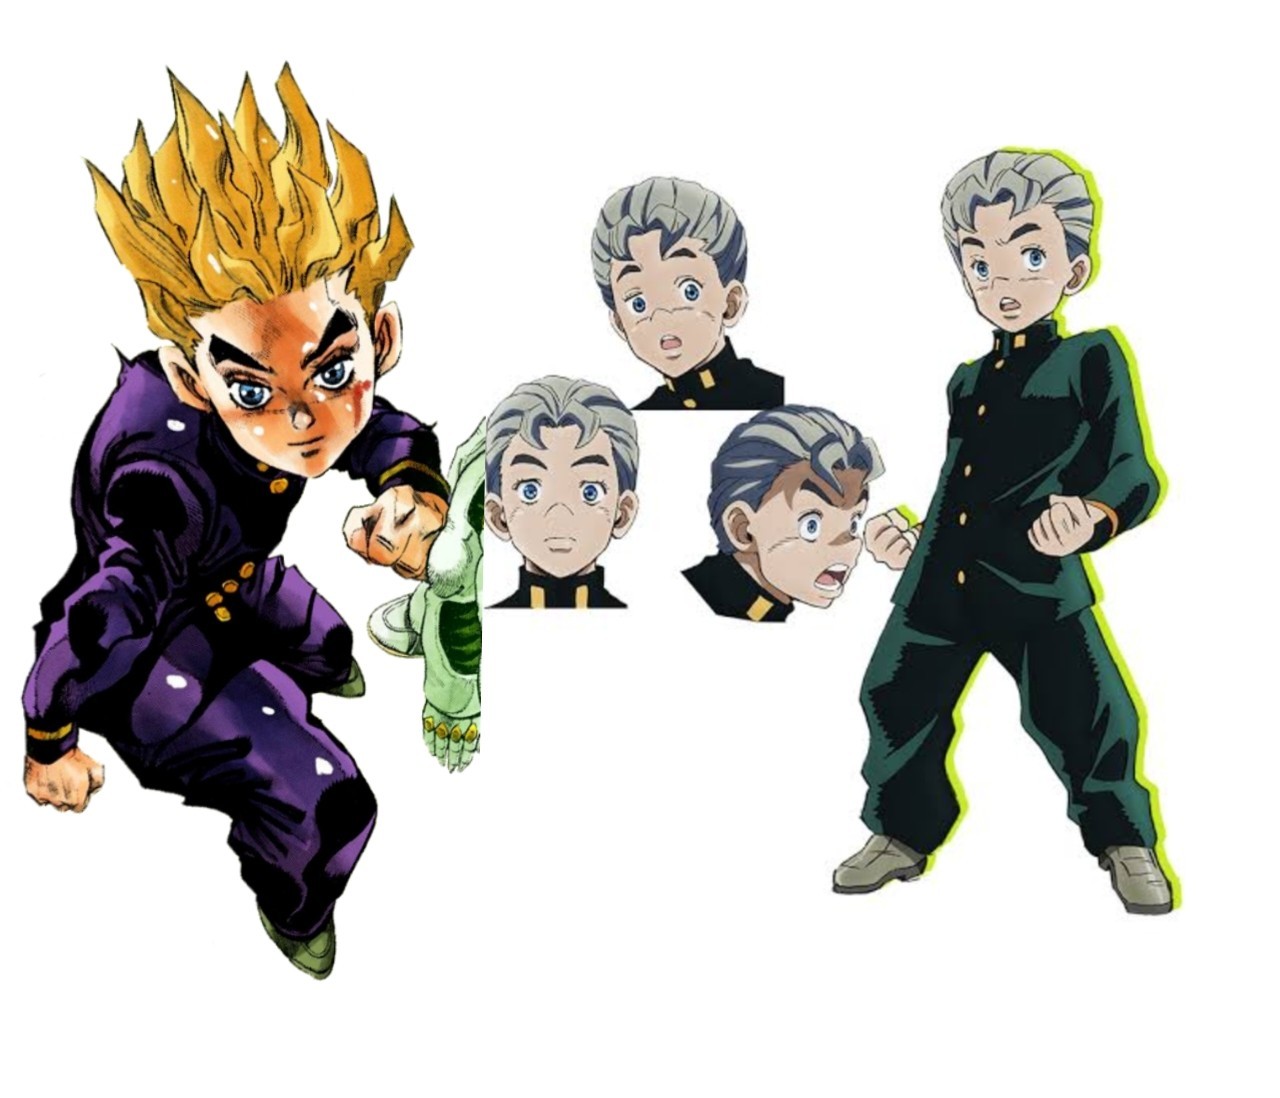 The Evolution of Koichi Hair: How One Man's Hairstyle Changed Over Time